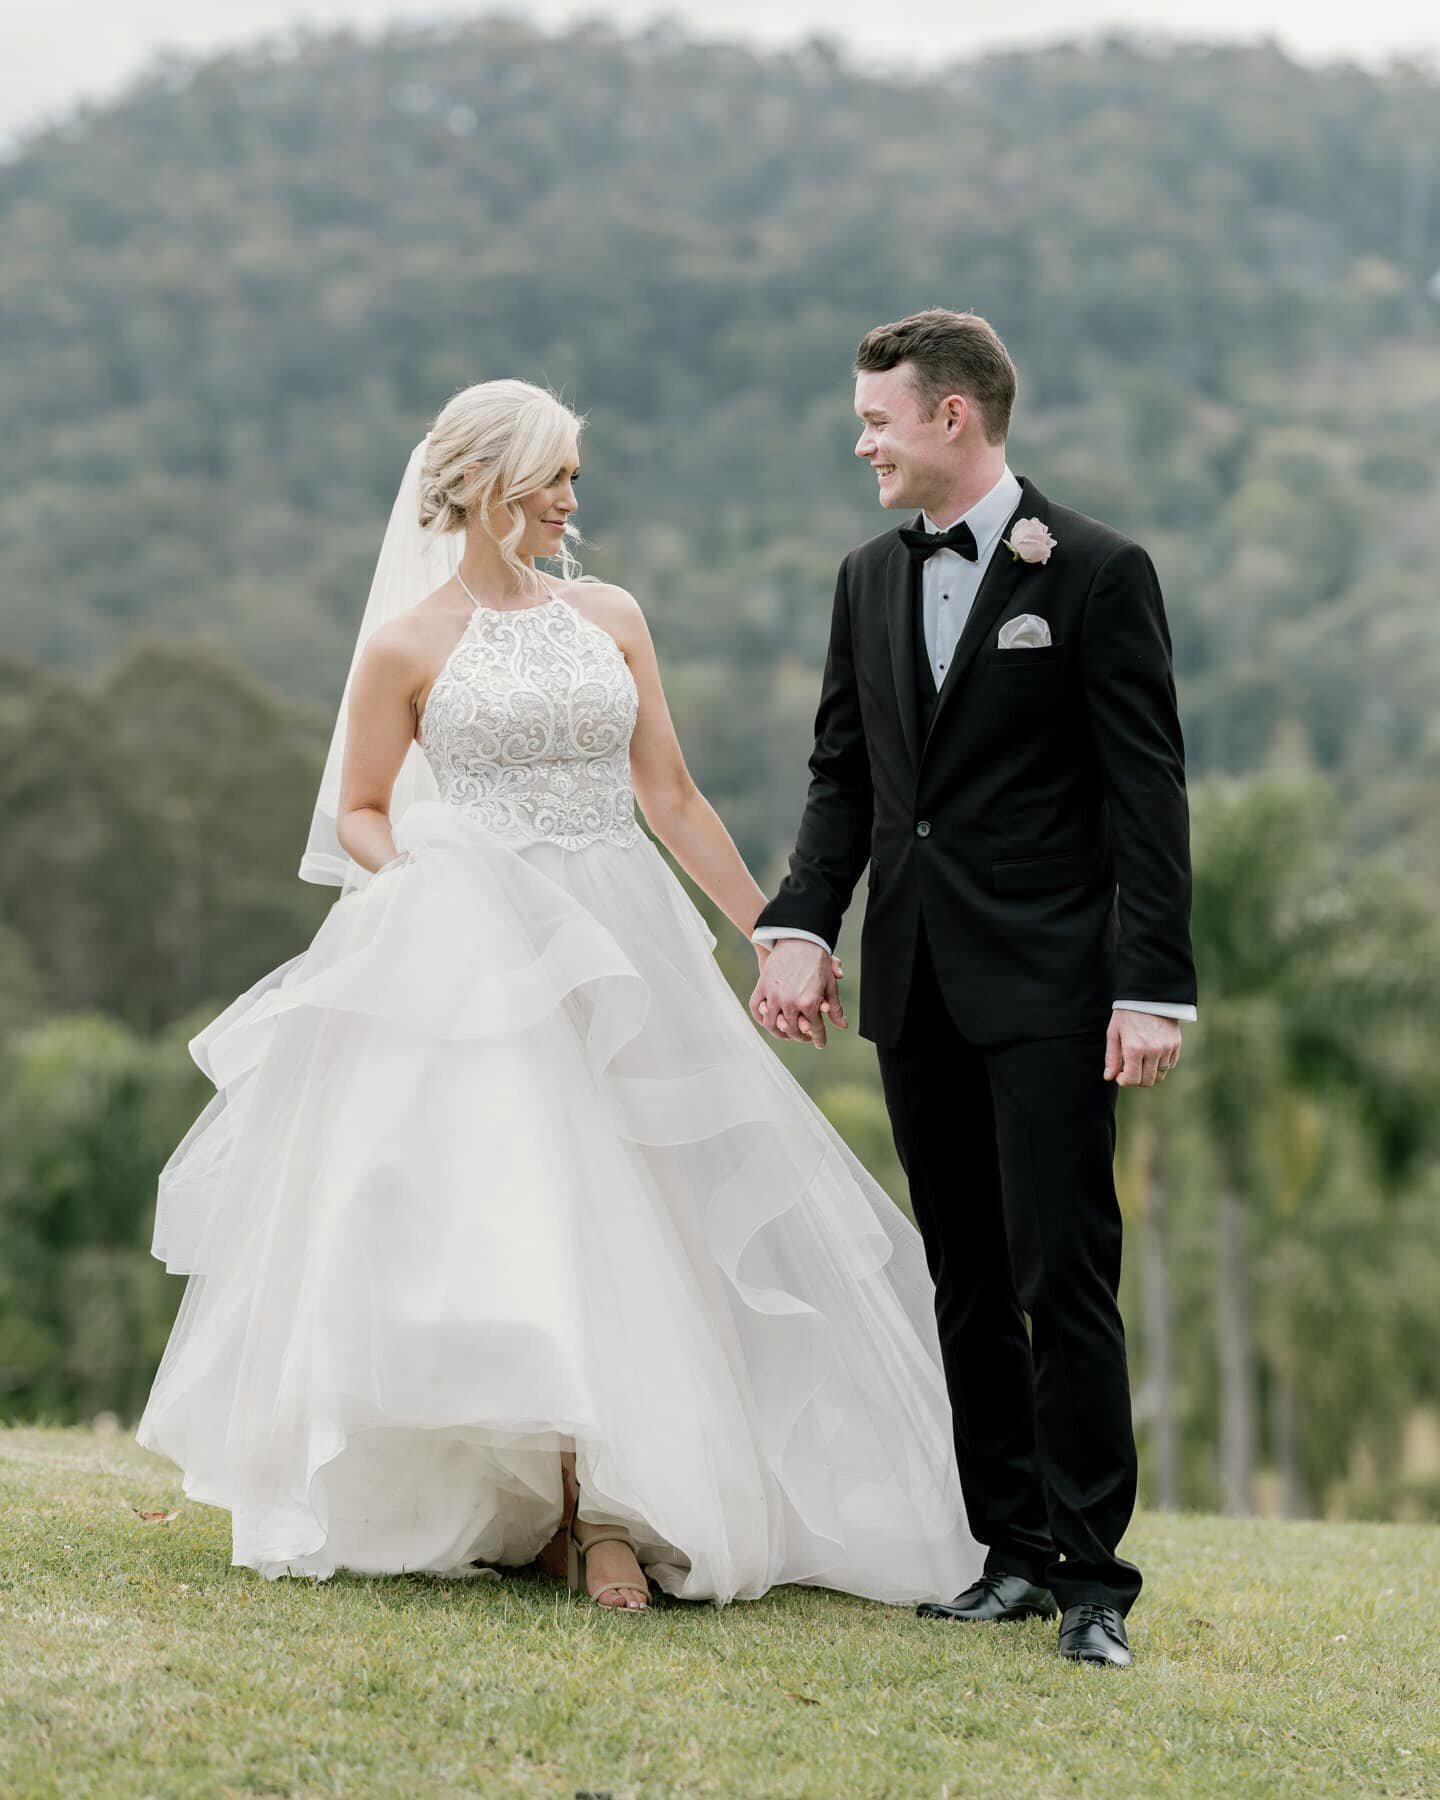 Bride and groom on their wedding day at Austinvilla Estate